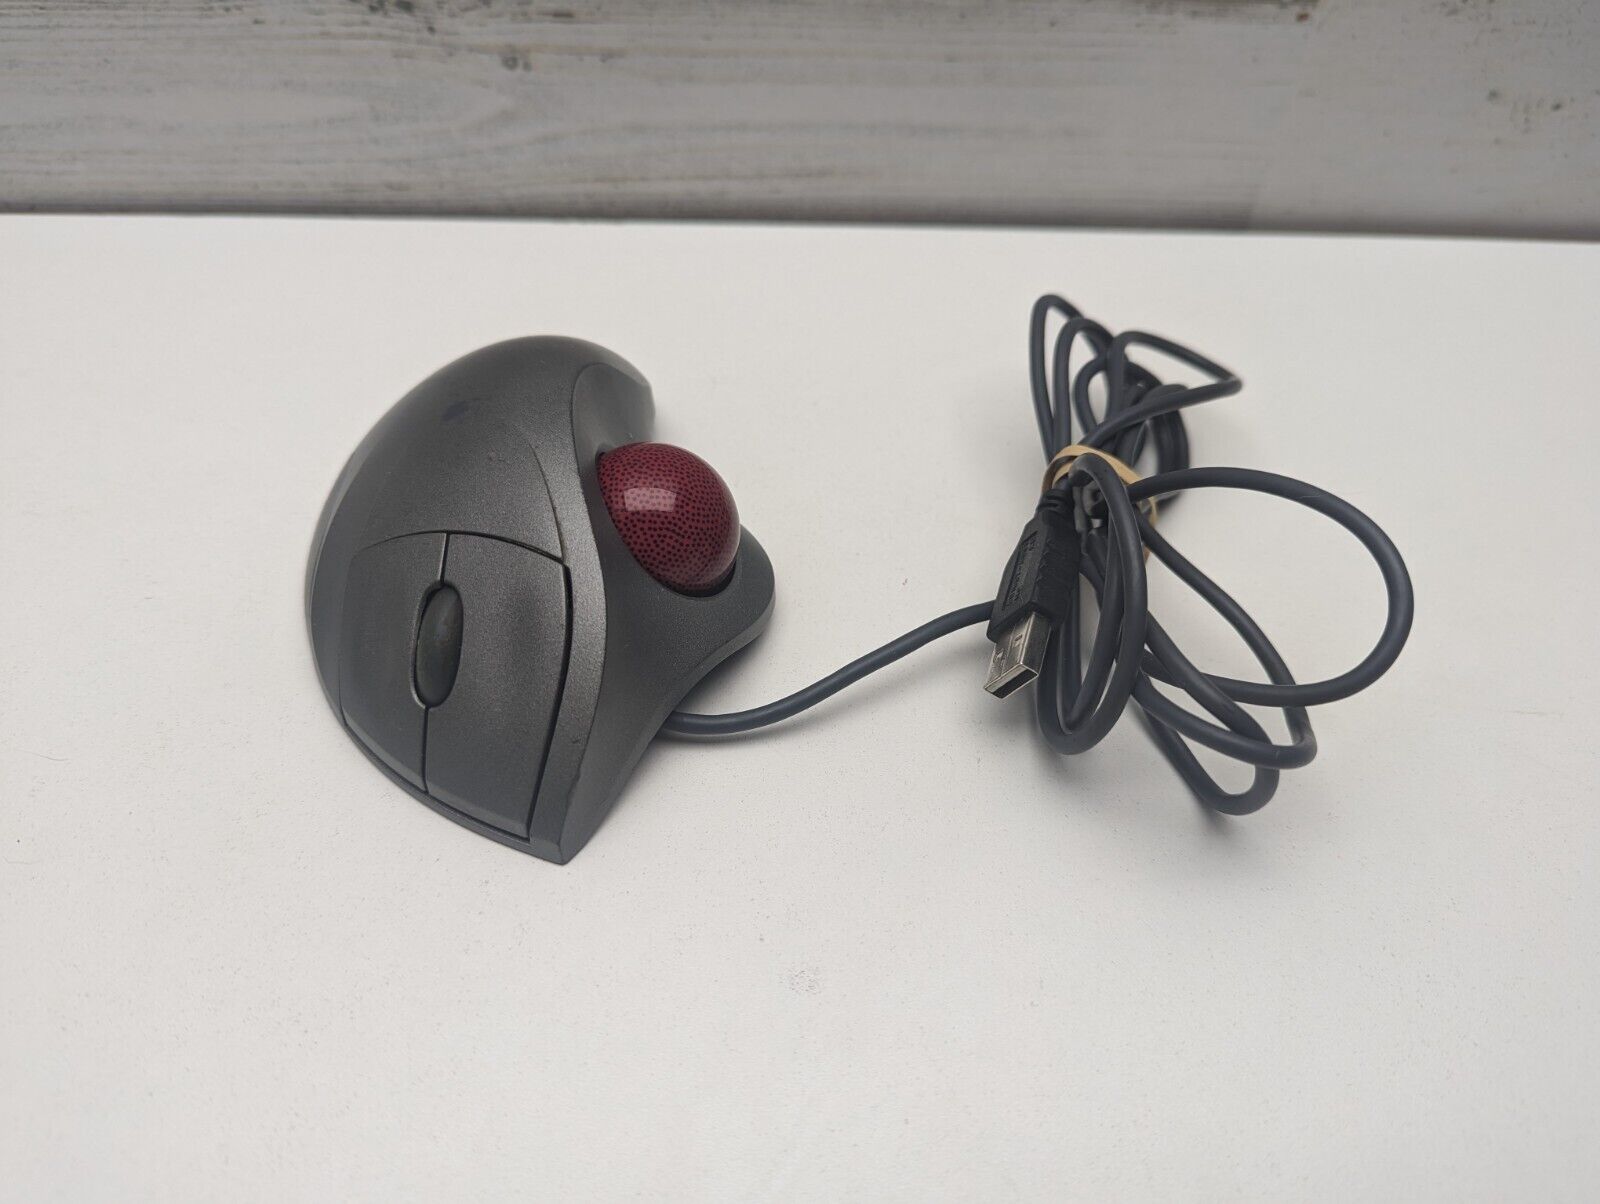 Logitech 804360-1000 Trackman Wheel Optical Mouse - Silver Works Great